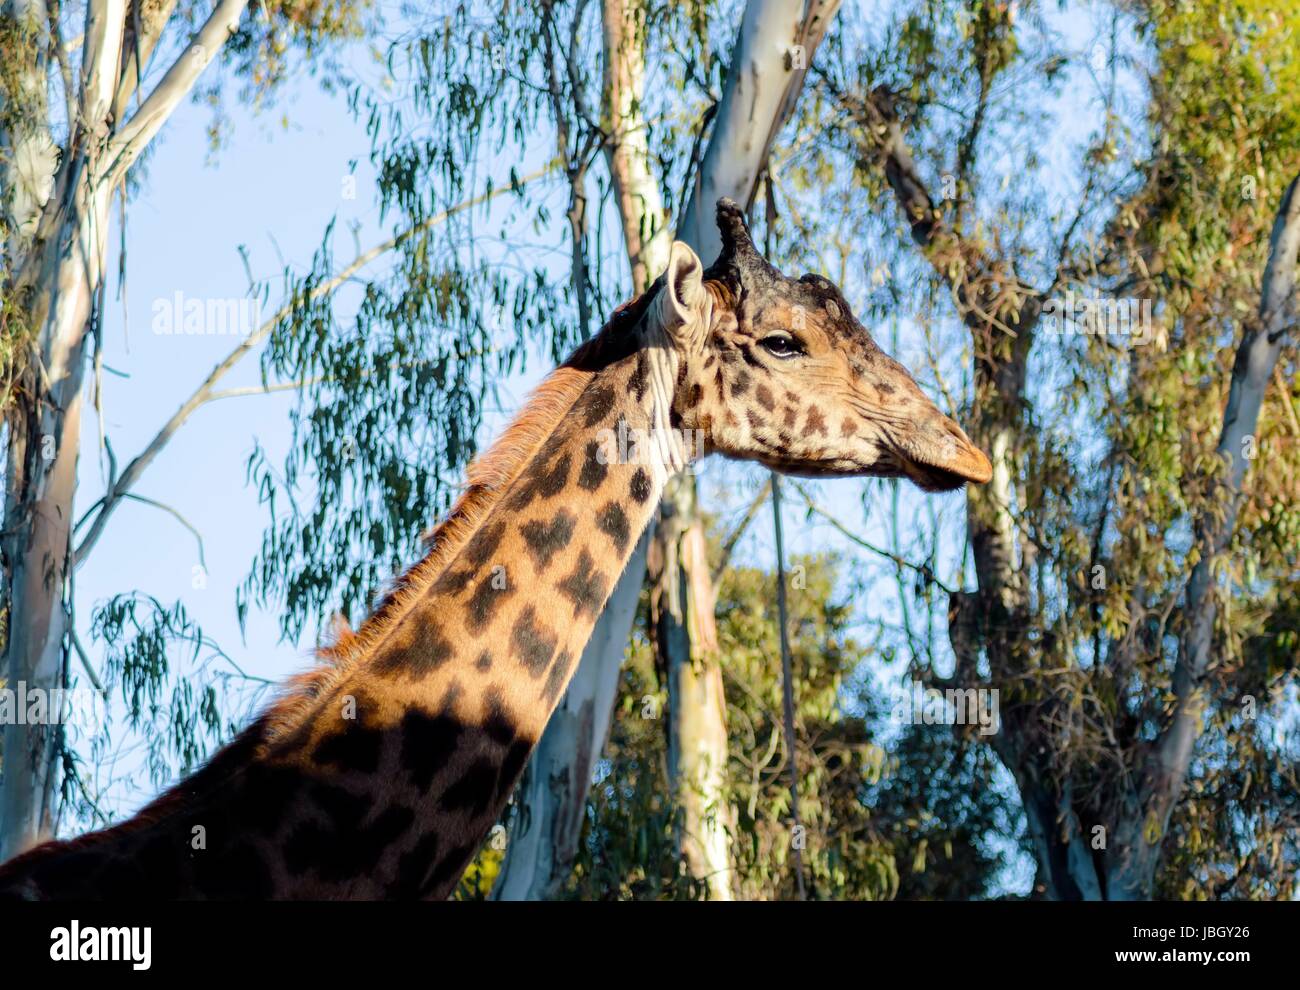 A close up view of an adult giraffe. The Giraffa camelopardalis is the tallest living terrestrial animal and the largest ruminant, with extremely long neck and legs, horn-like ossicones and distinctive coat patterns Stock Photo